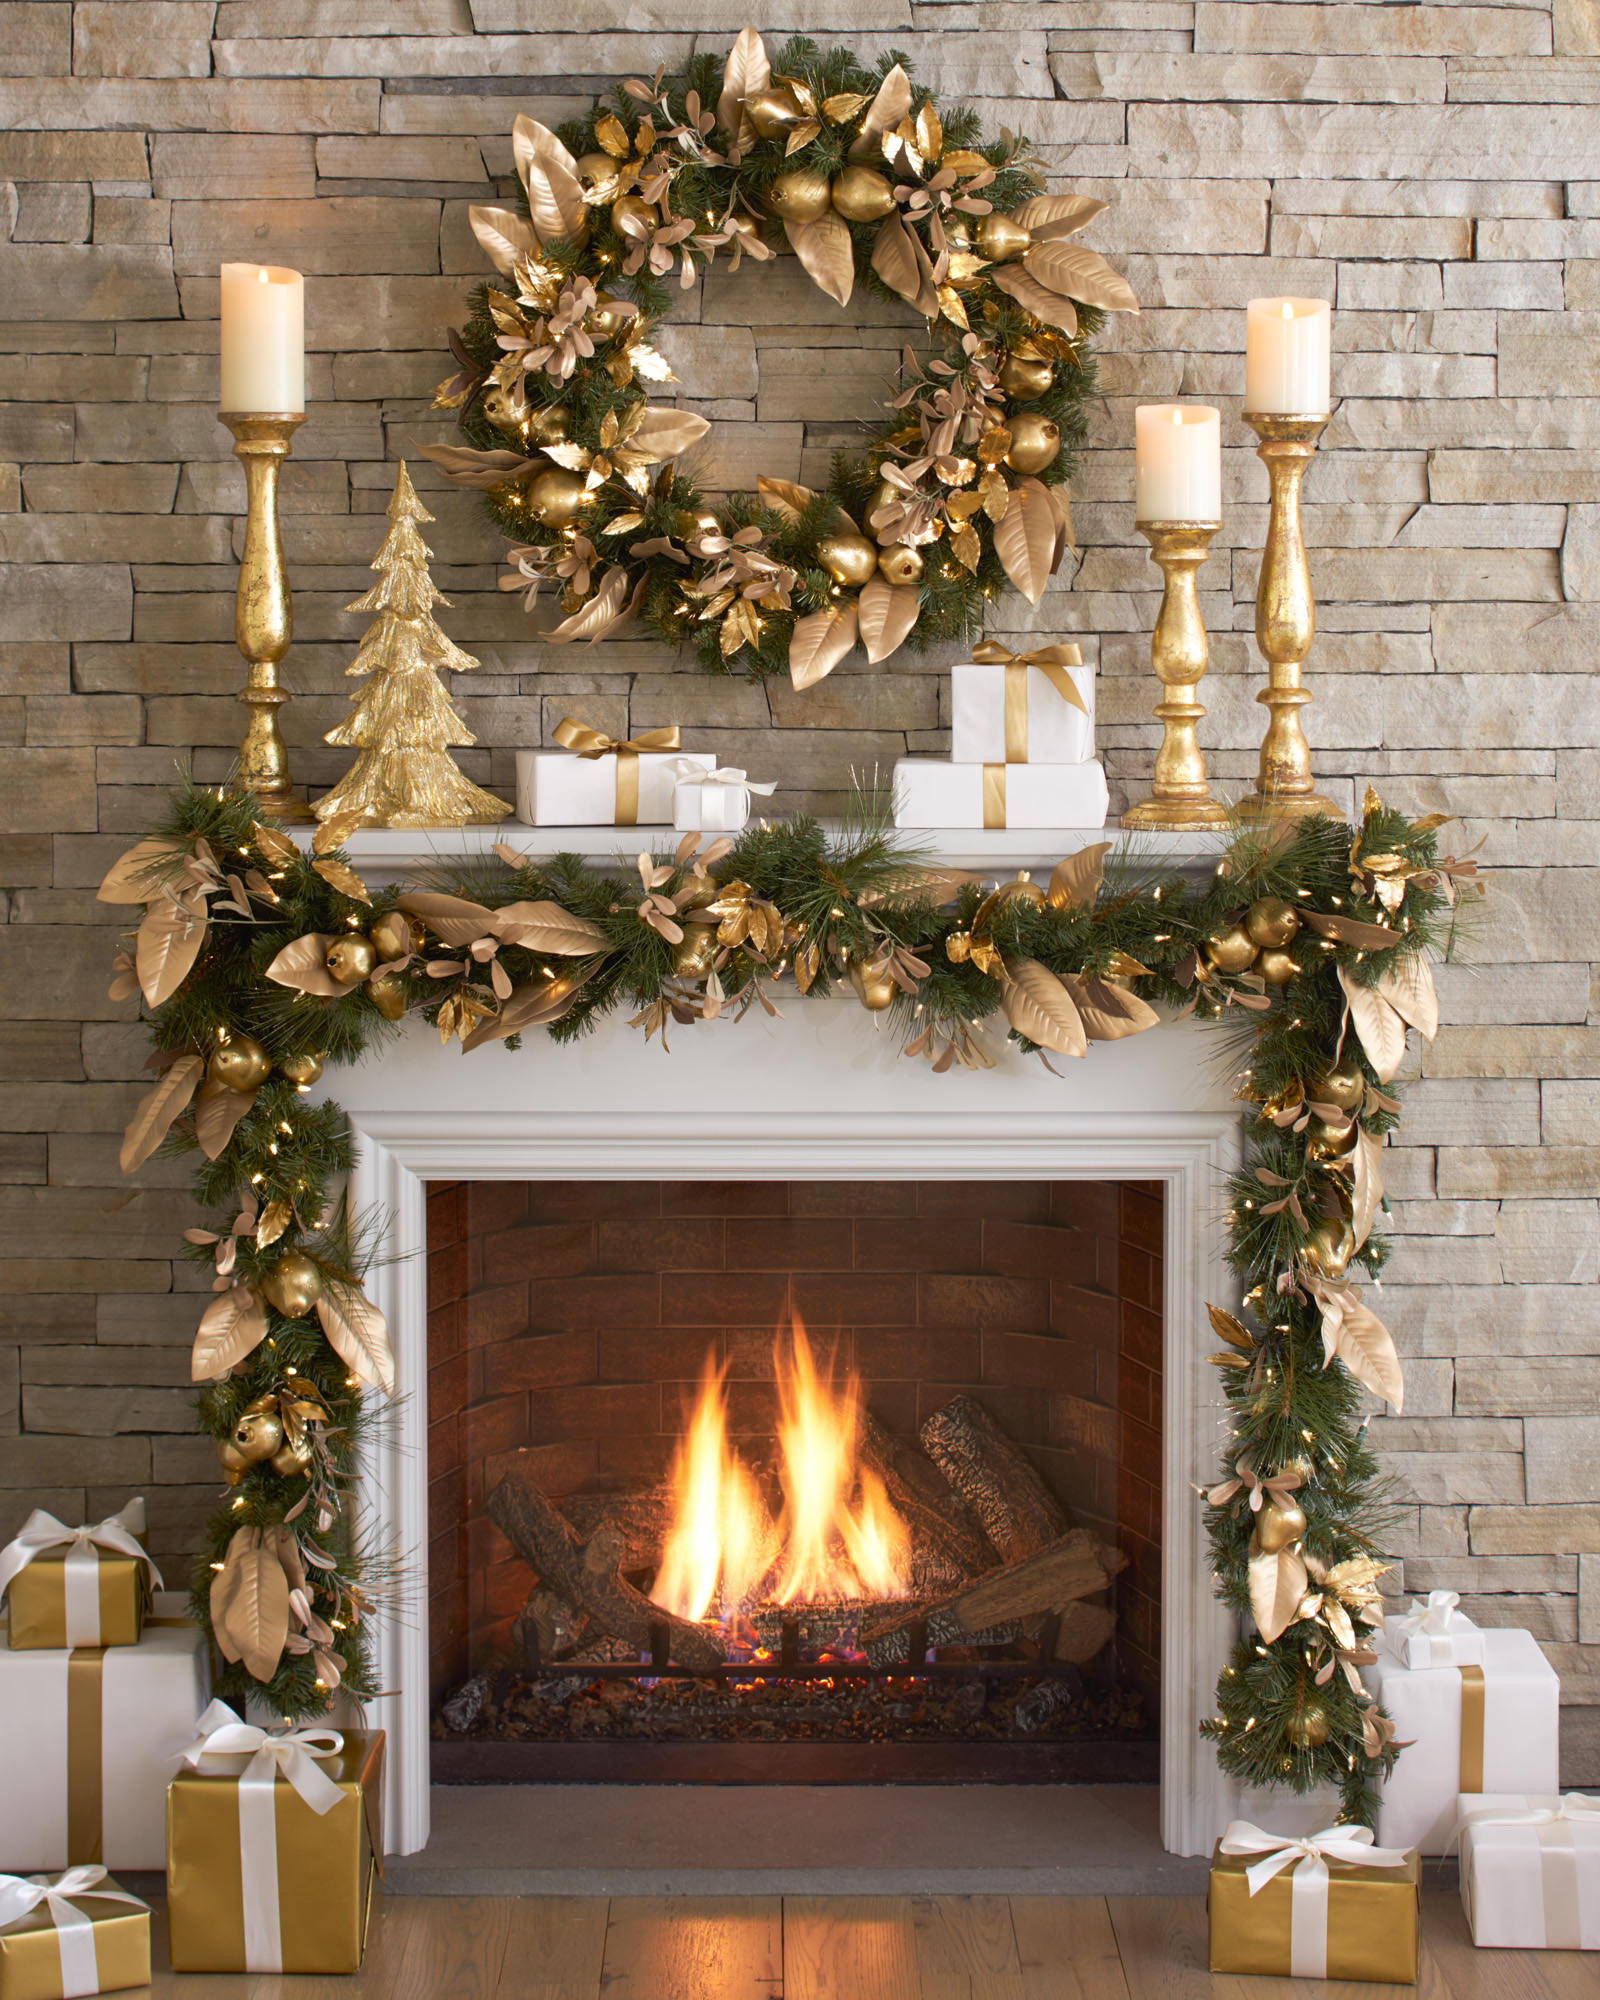 Fireplace Christmas Decoration
 50 Christmas Mantles For Some Serious Decorating Inspiration